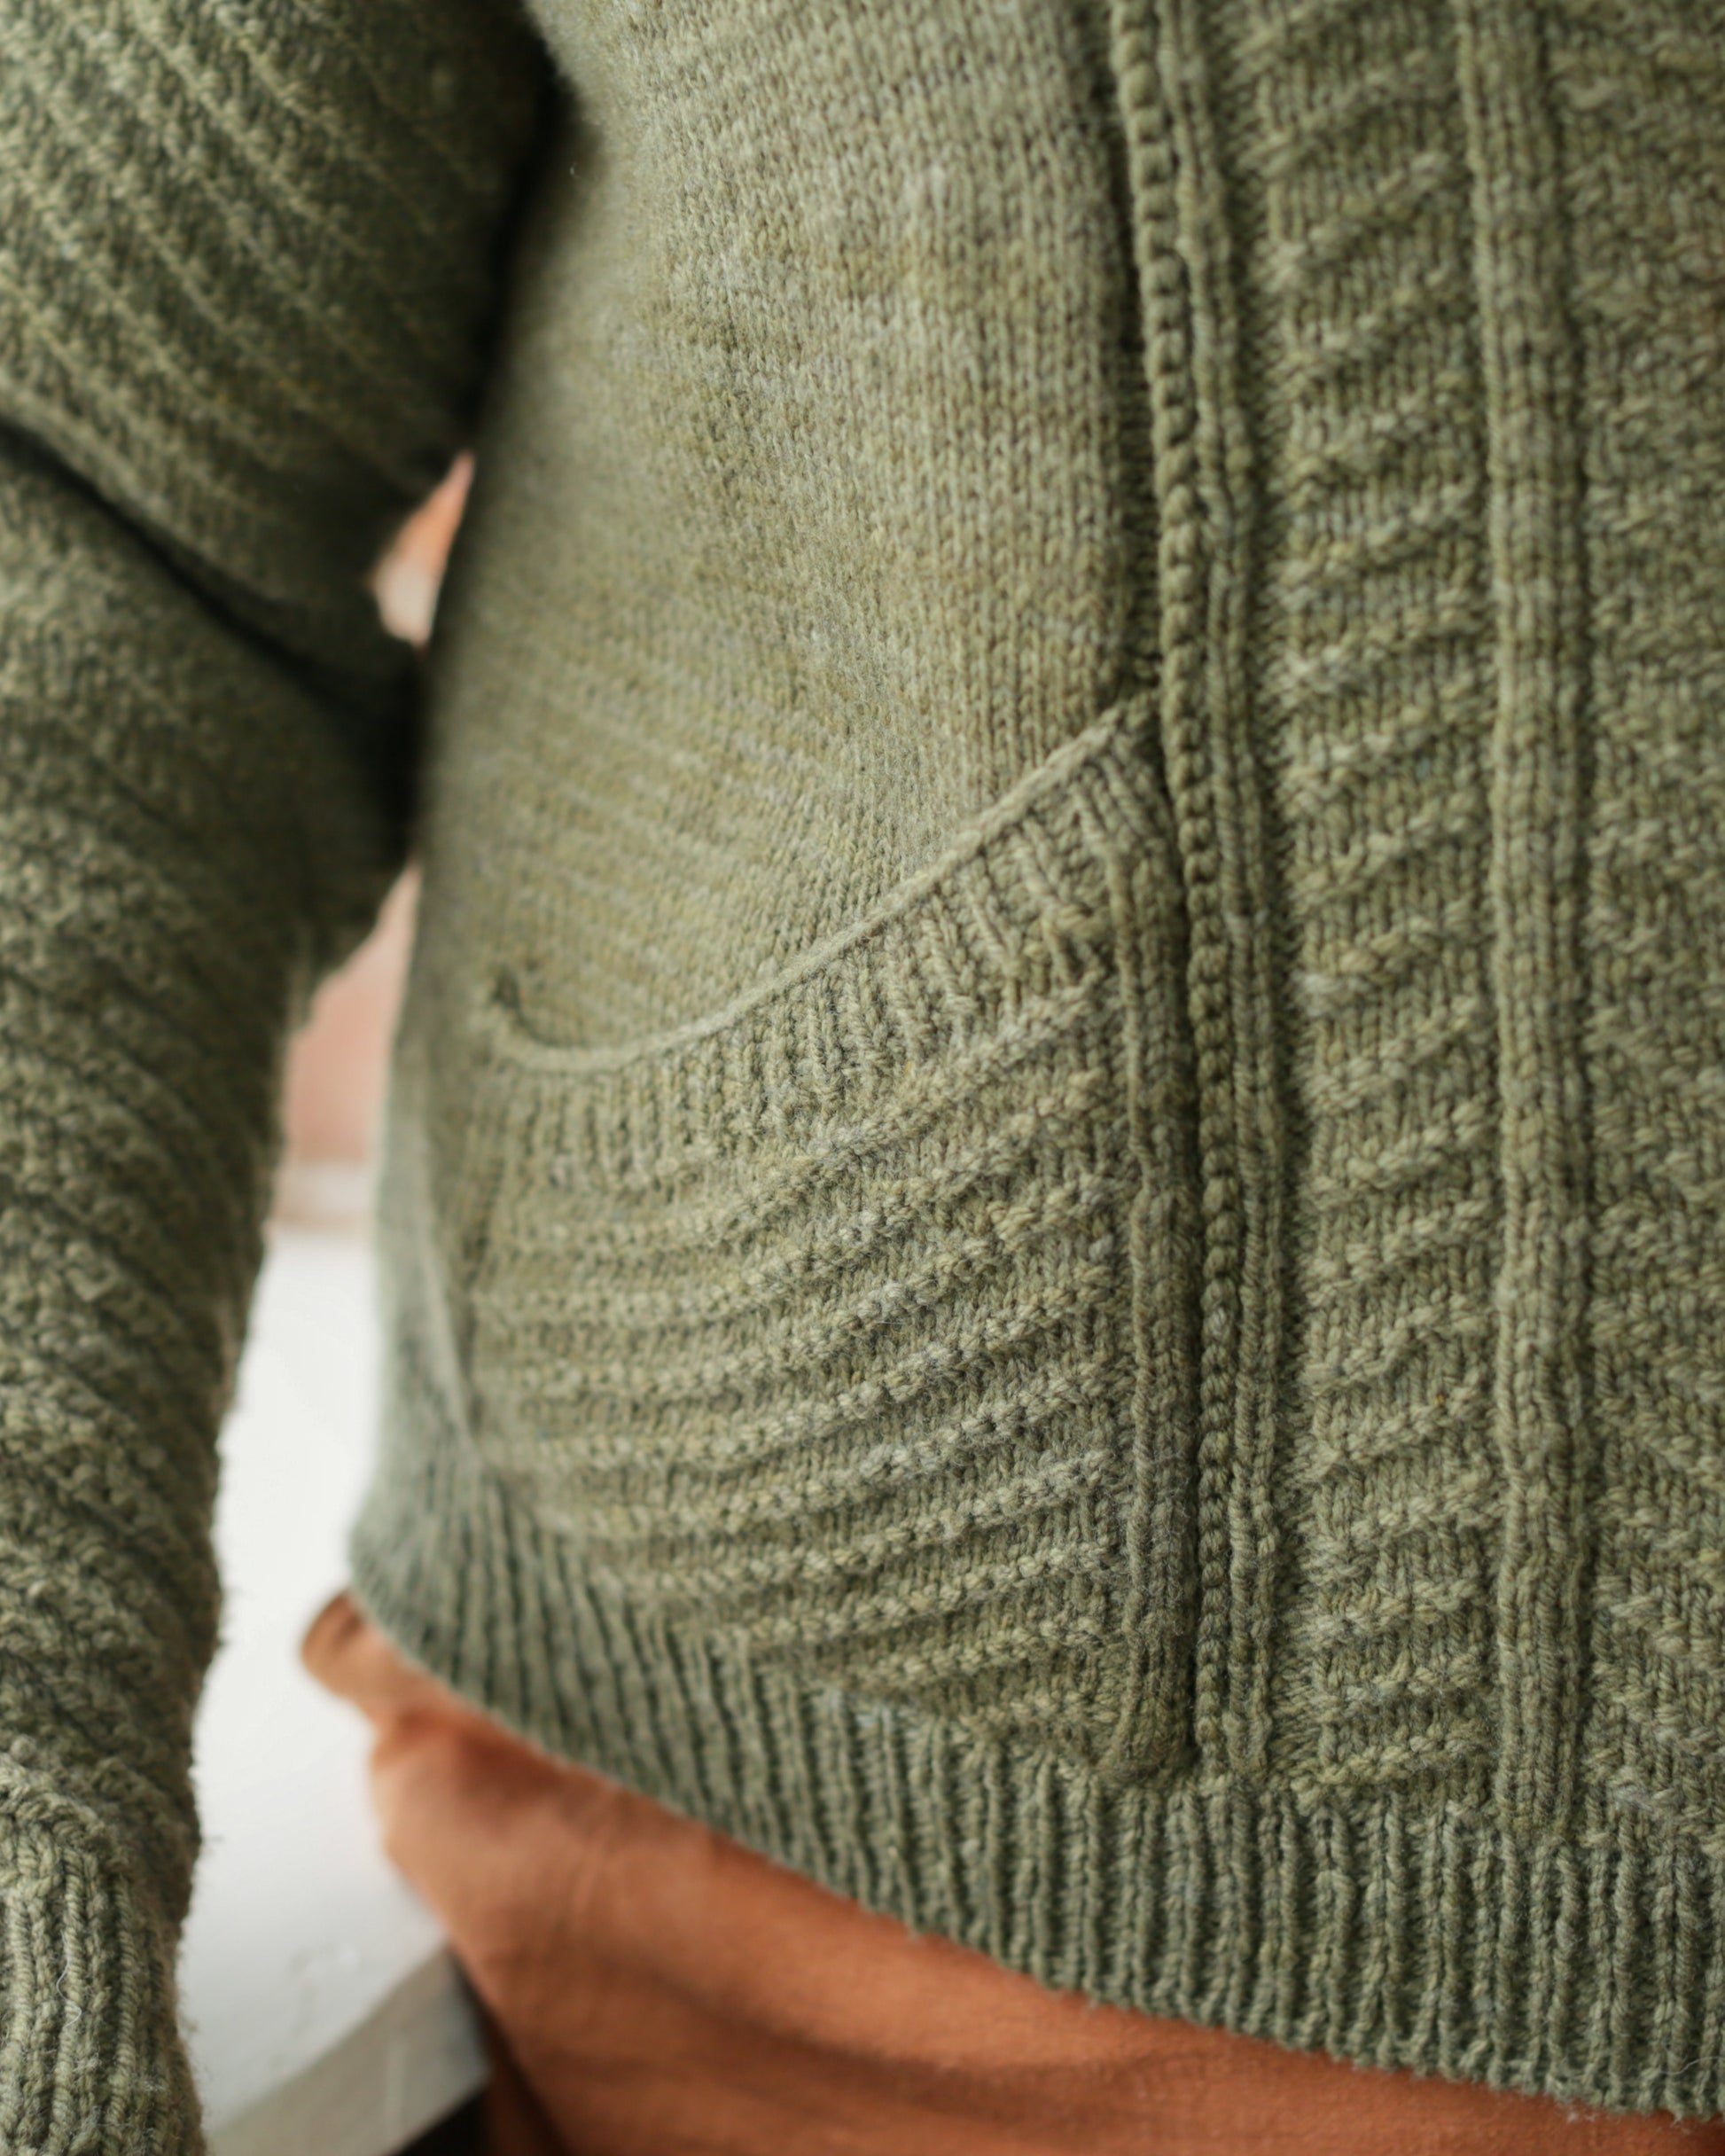 Seen up close, Jen wears a green cardigan with a chevron design. The camera focuses on the slanted front pocket.